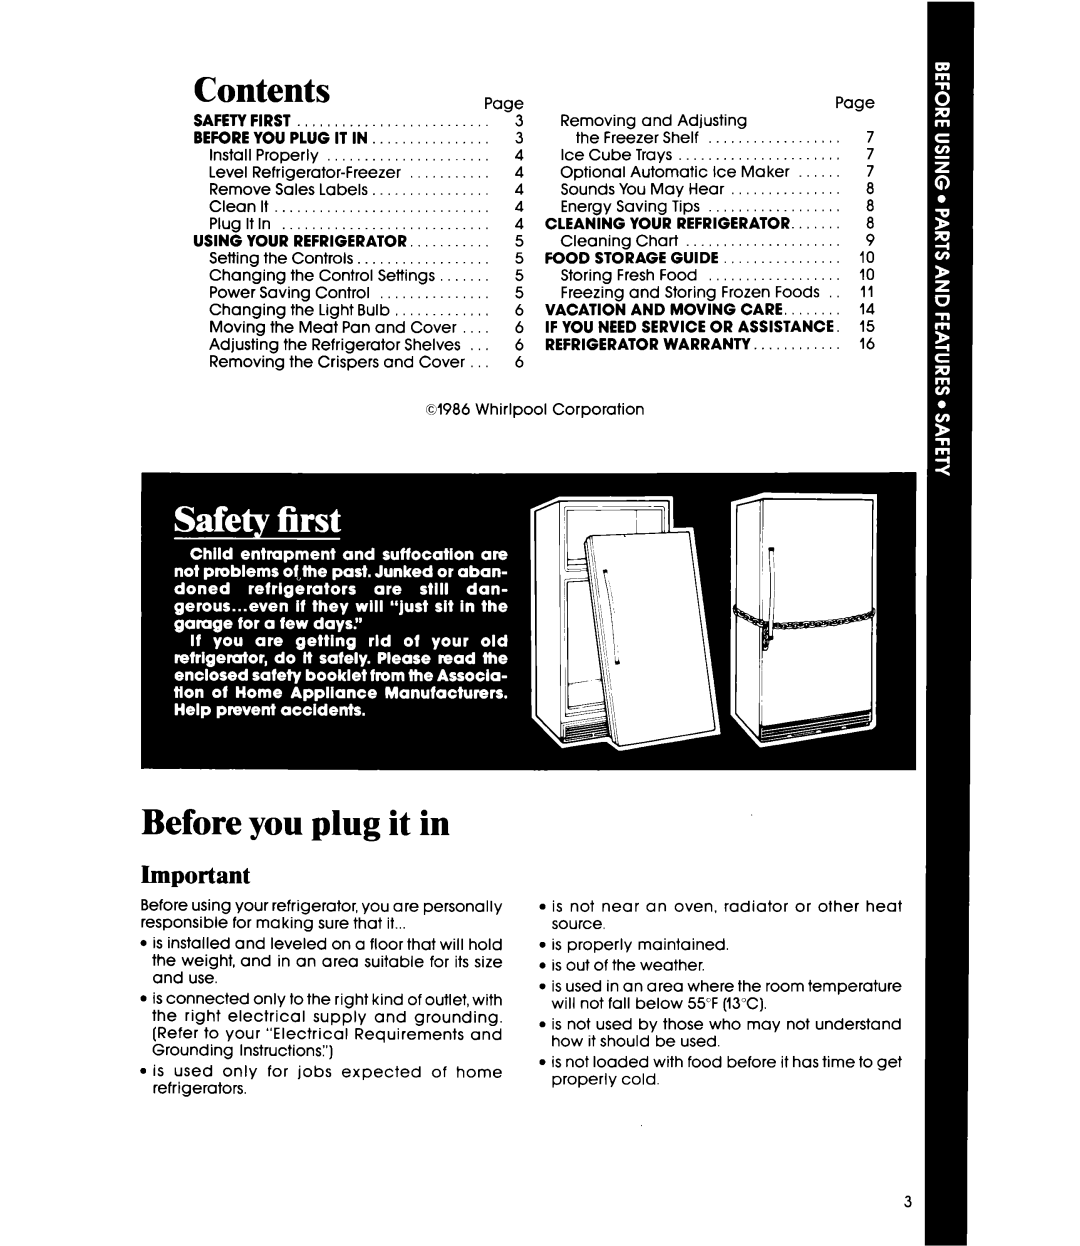 Whirlpool ETl8MK manual Contents Page, Before you plug it in, SAFETYFIRST3 BEFOREYOU PLUG IT IN, Using Your Refrigerator 